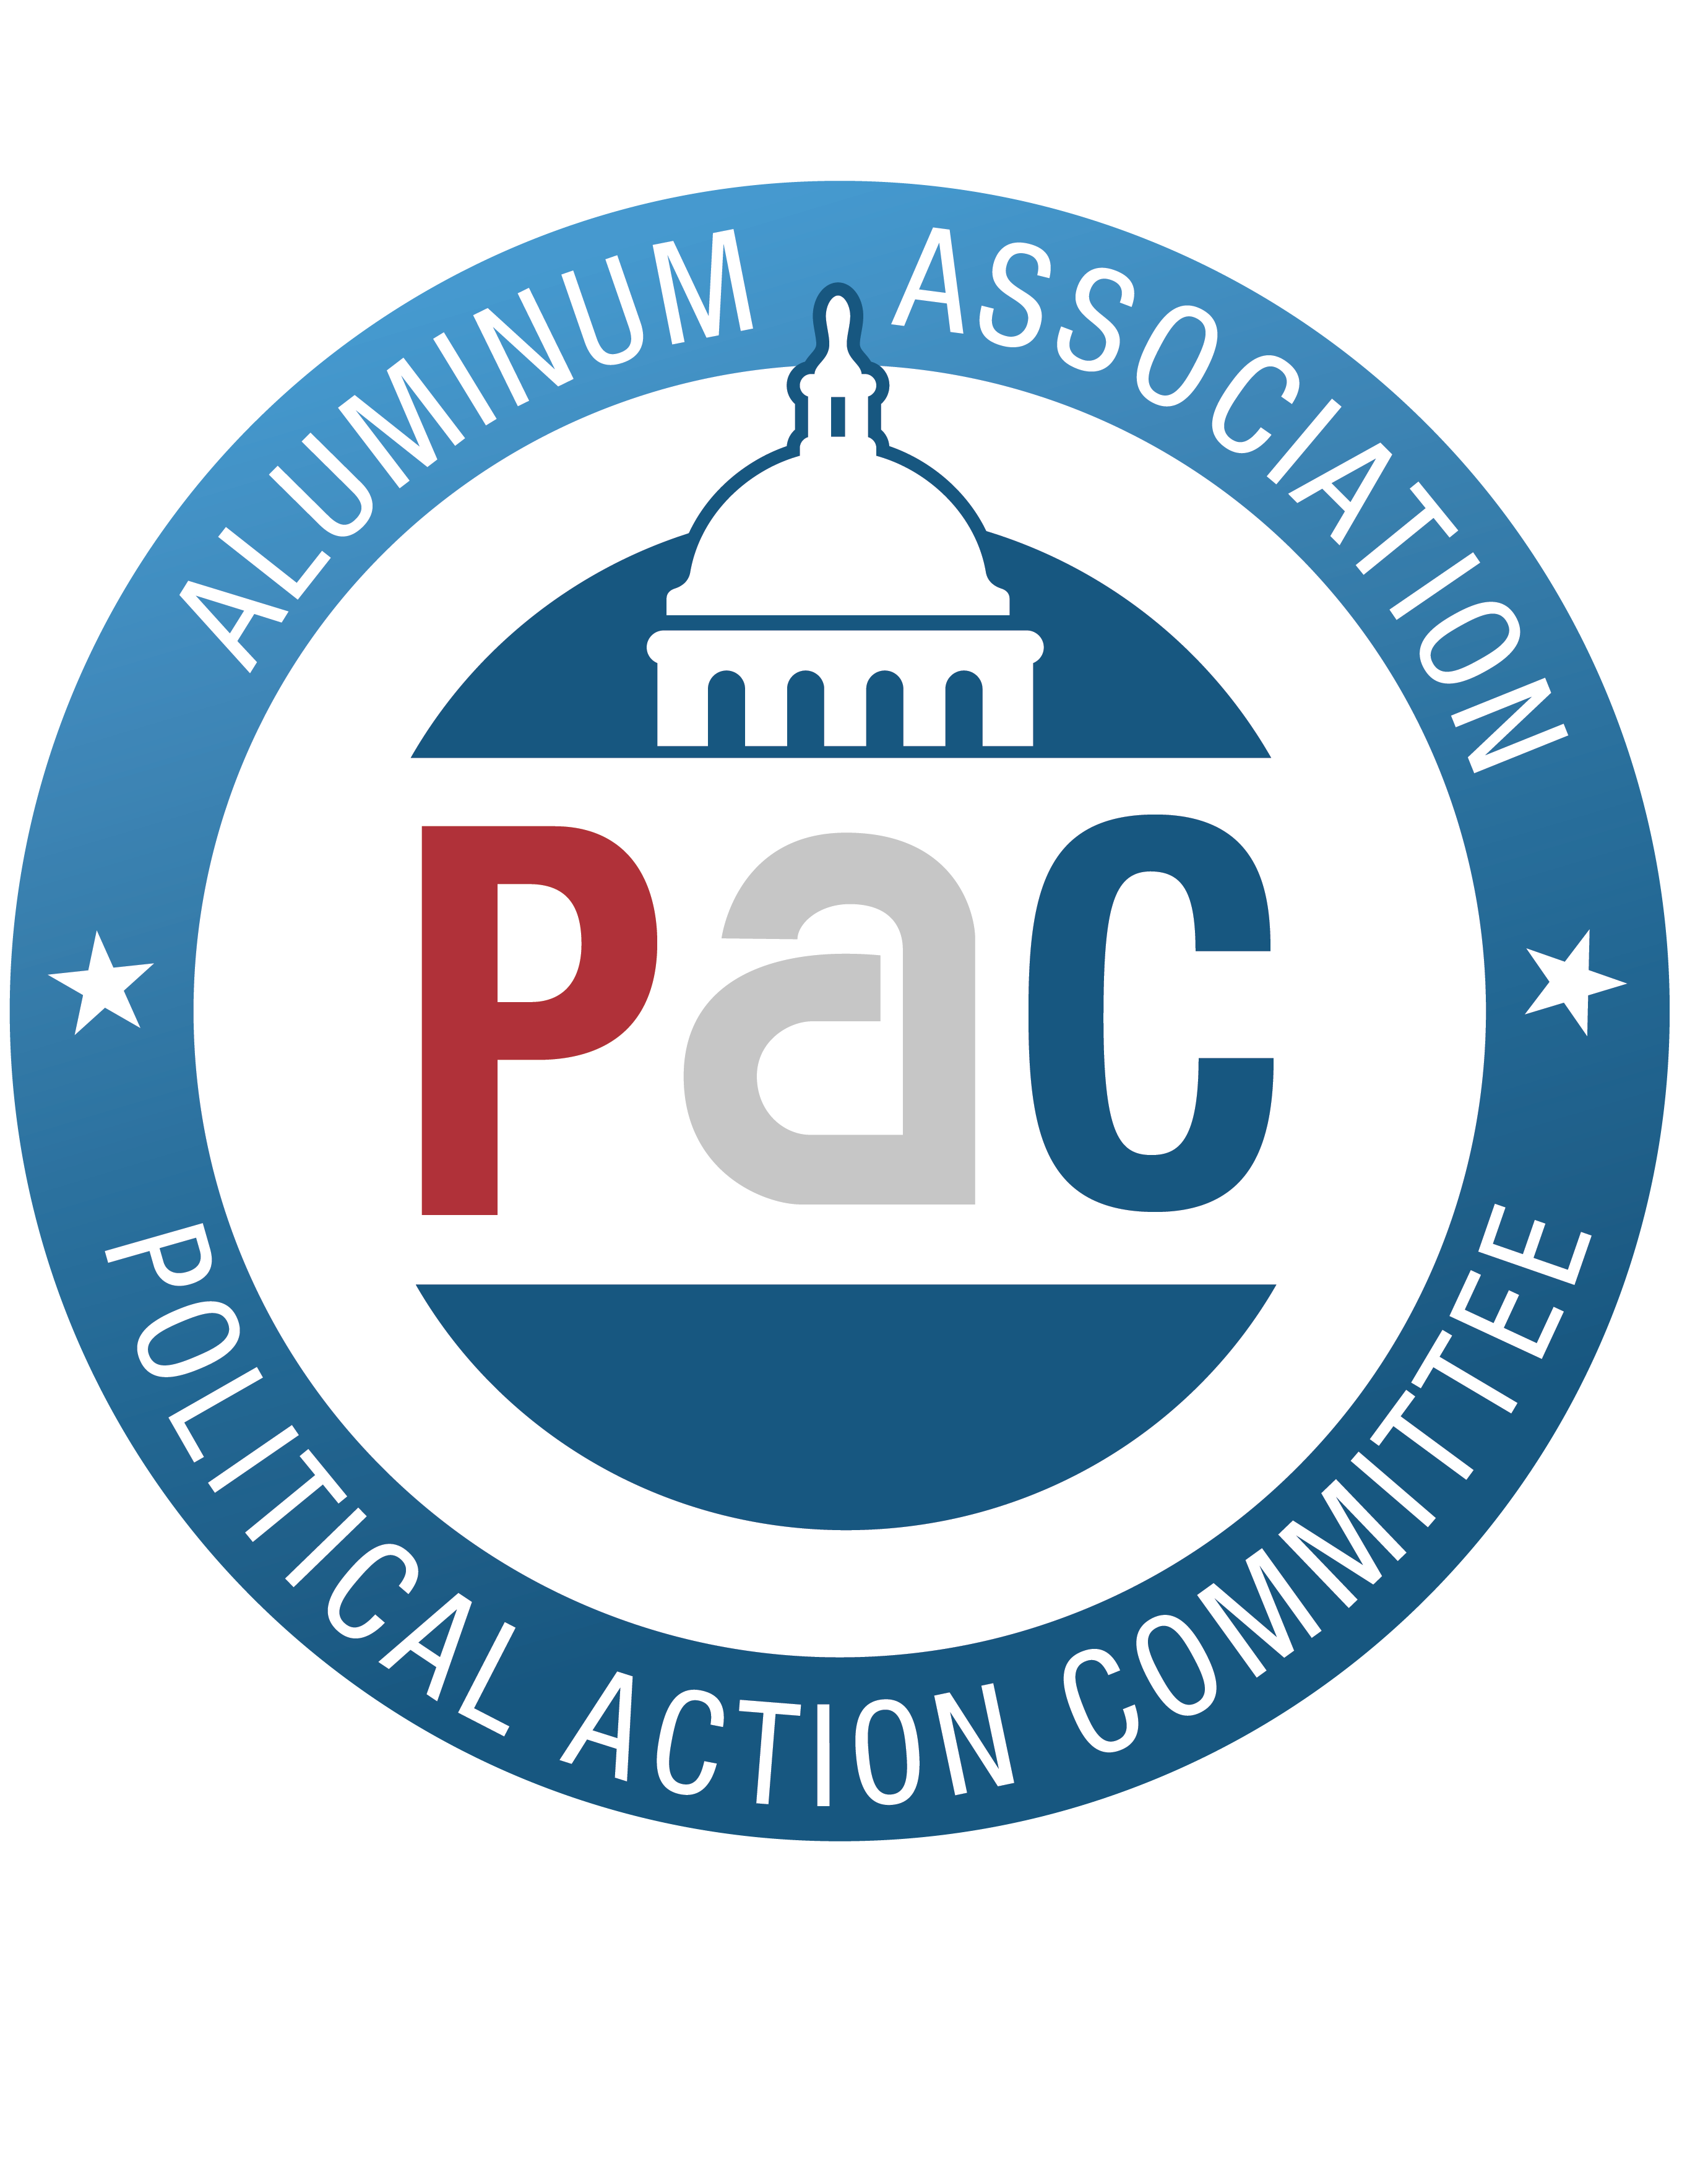 Design of capitol dome with PAC letters below surrounded by a blue circle with text on the circle: Aluminum Association Political Action Committee 